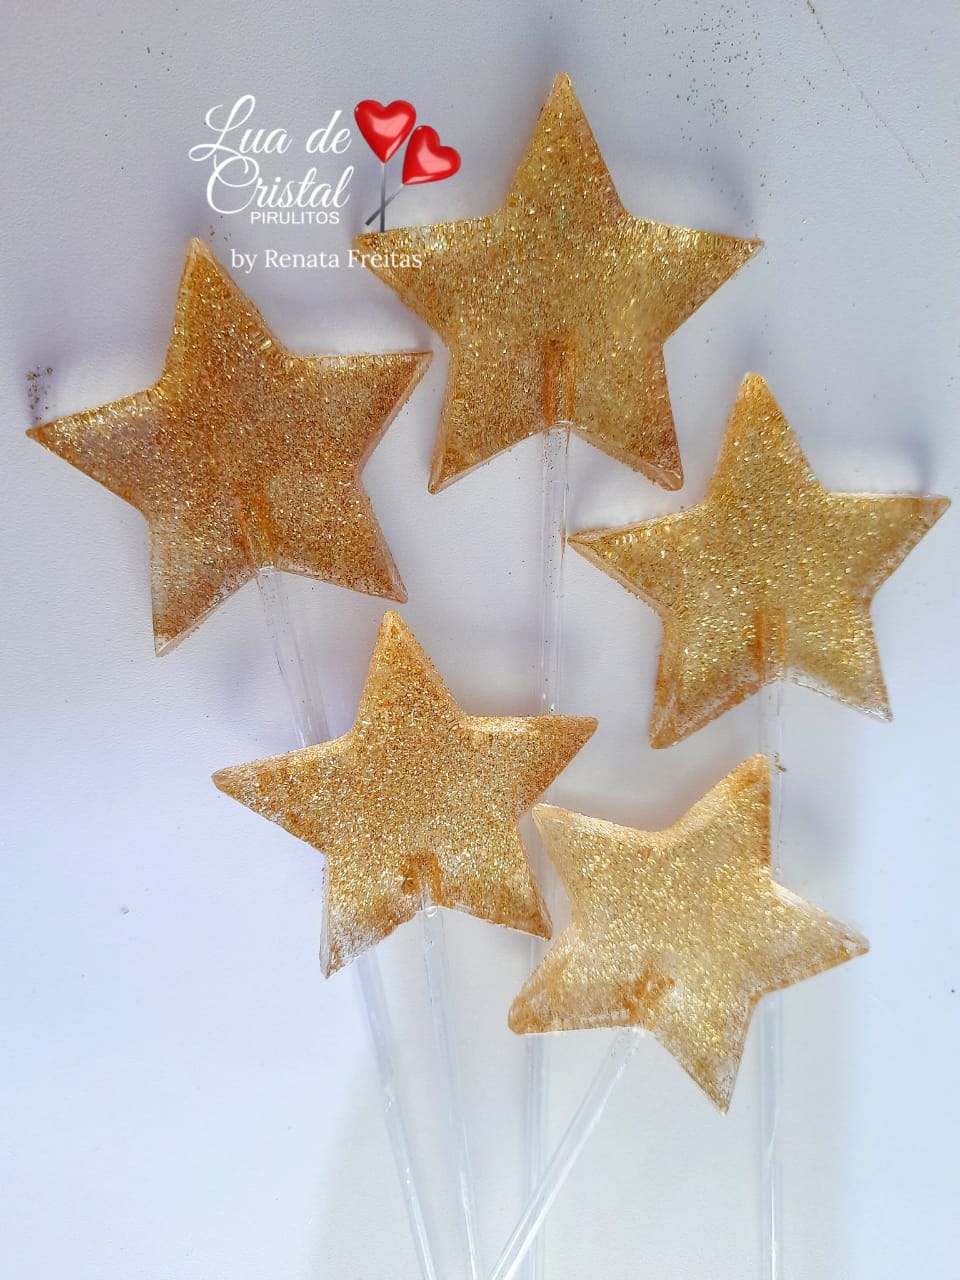 Silicone Lollipop Mold for Hard Candy Molds Silicone Chocolate Lollipop  Moulds with Shape of Five-pointed Star